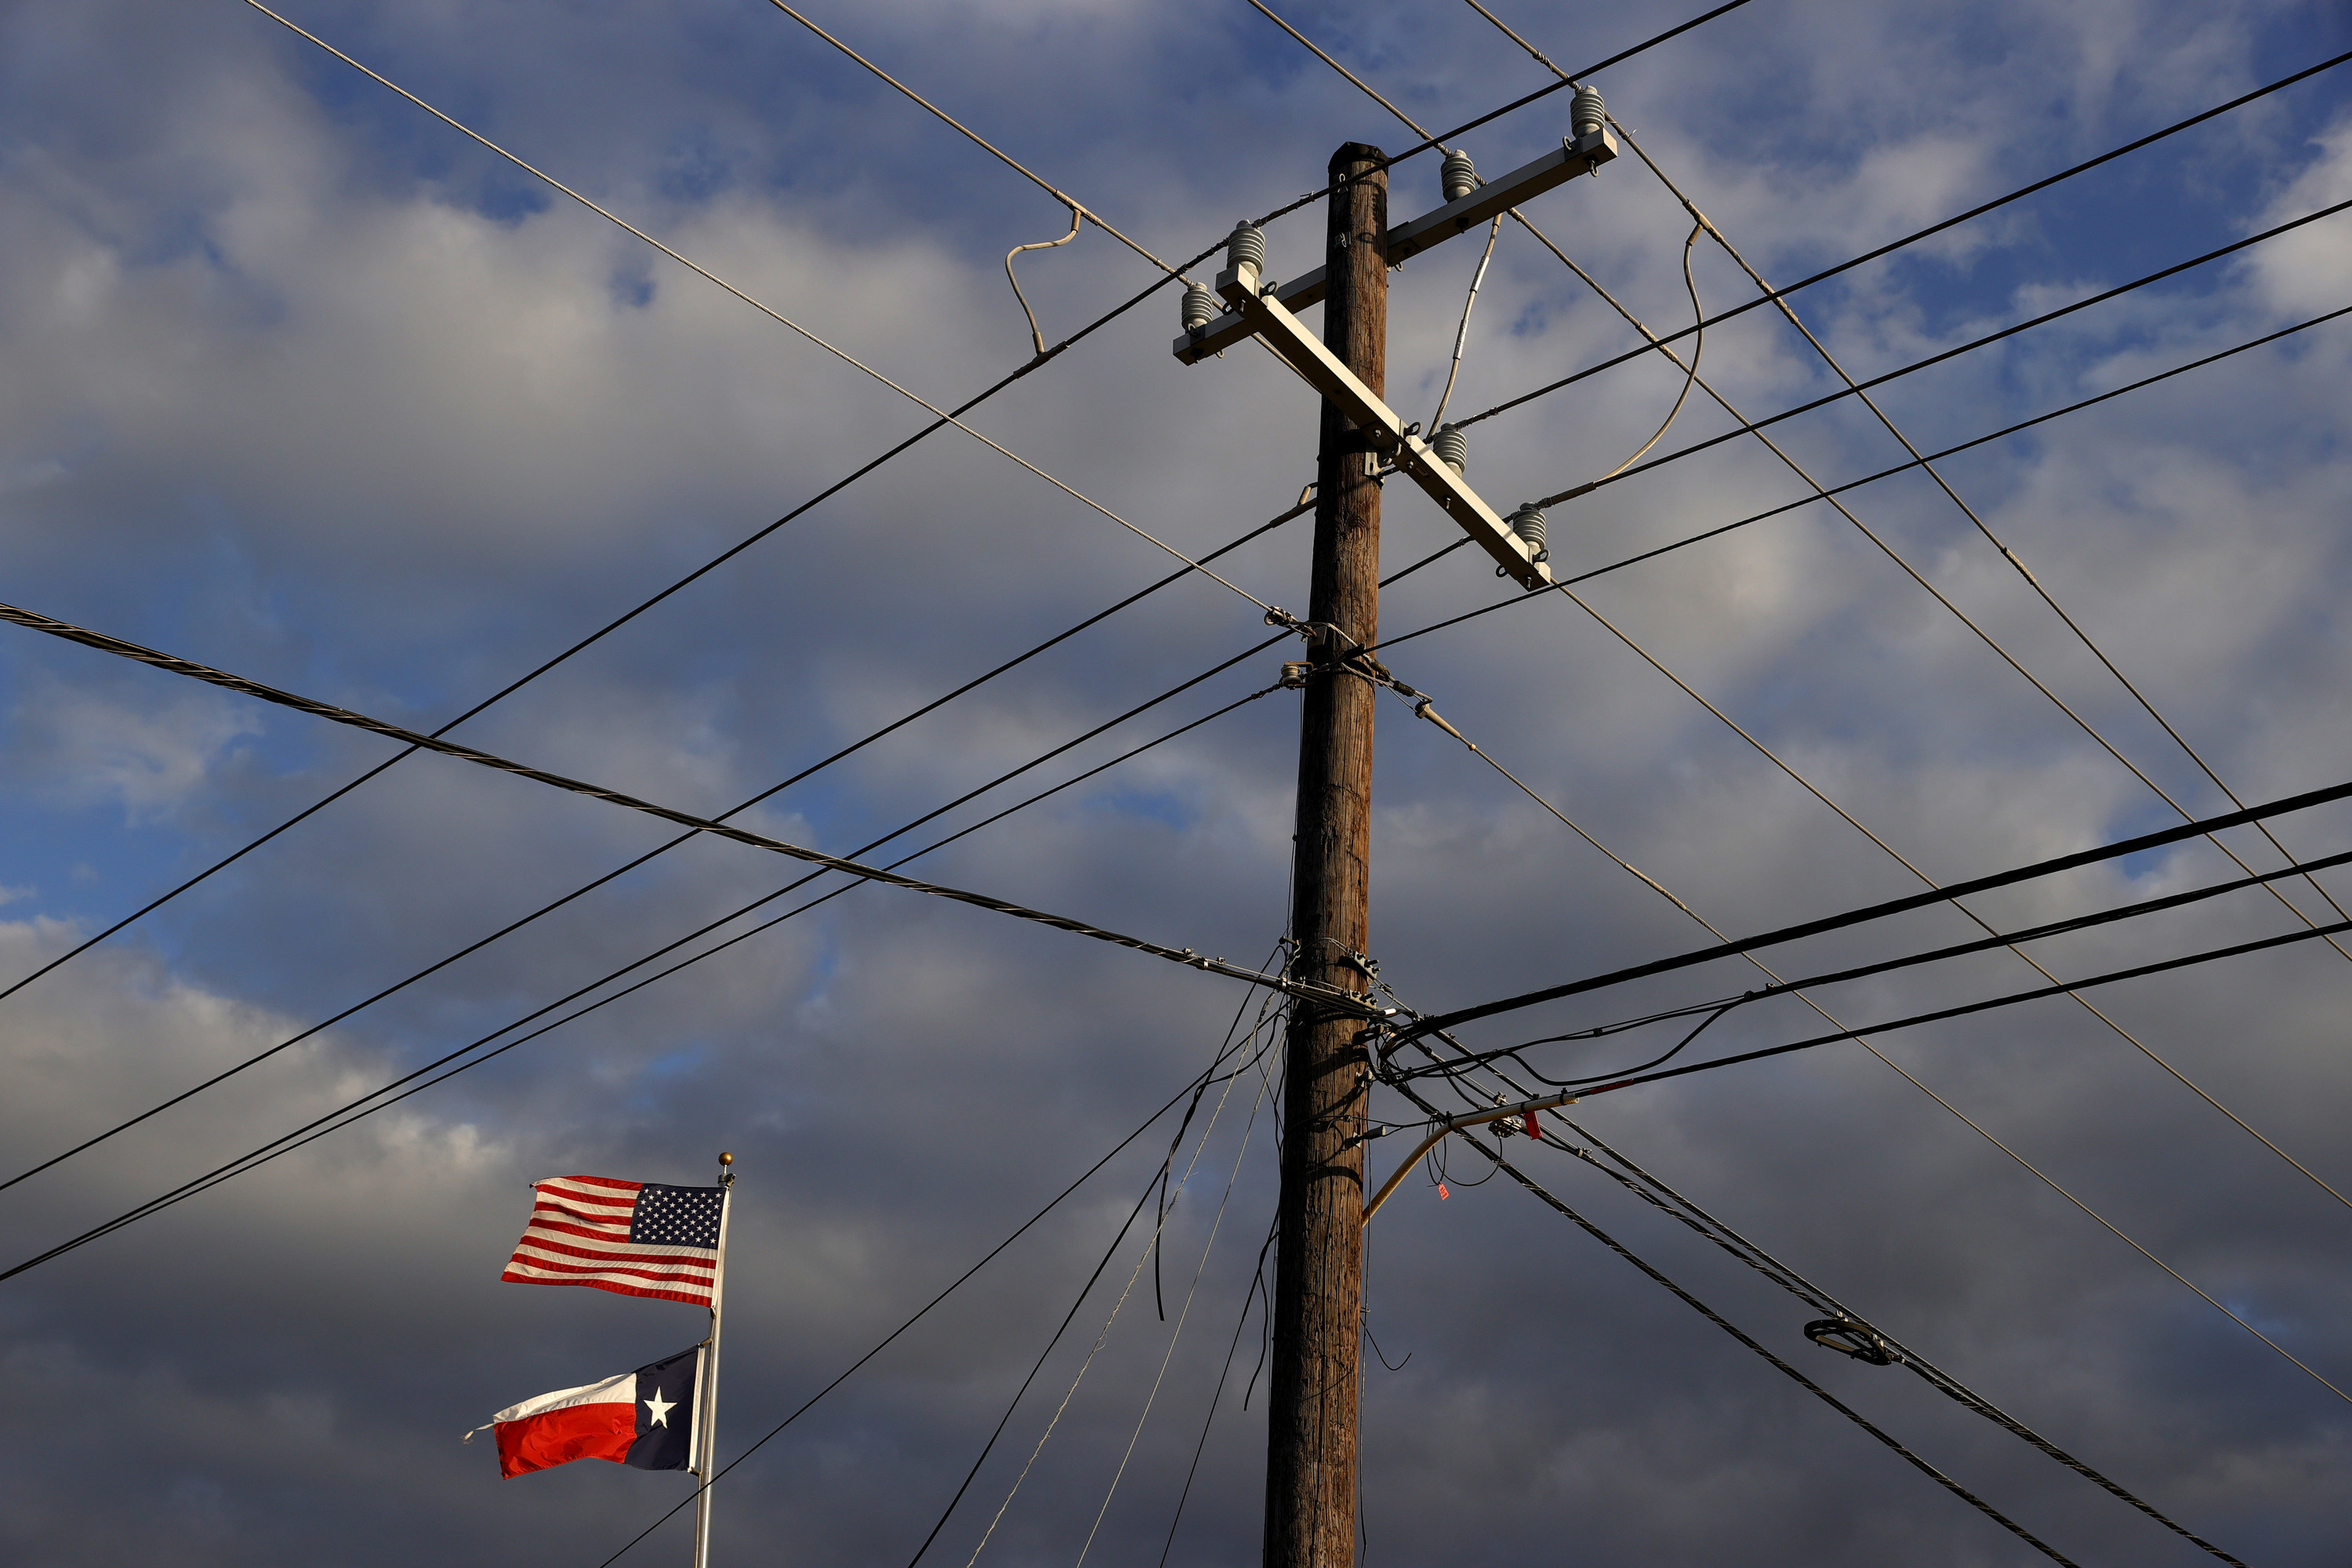 The US and Texas flags fly next to a power pole